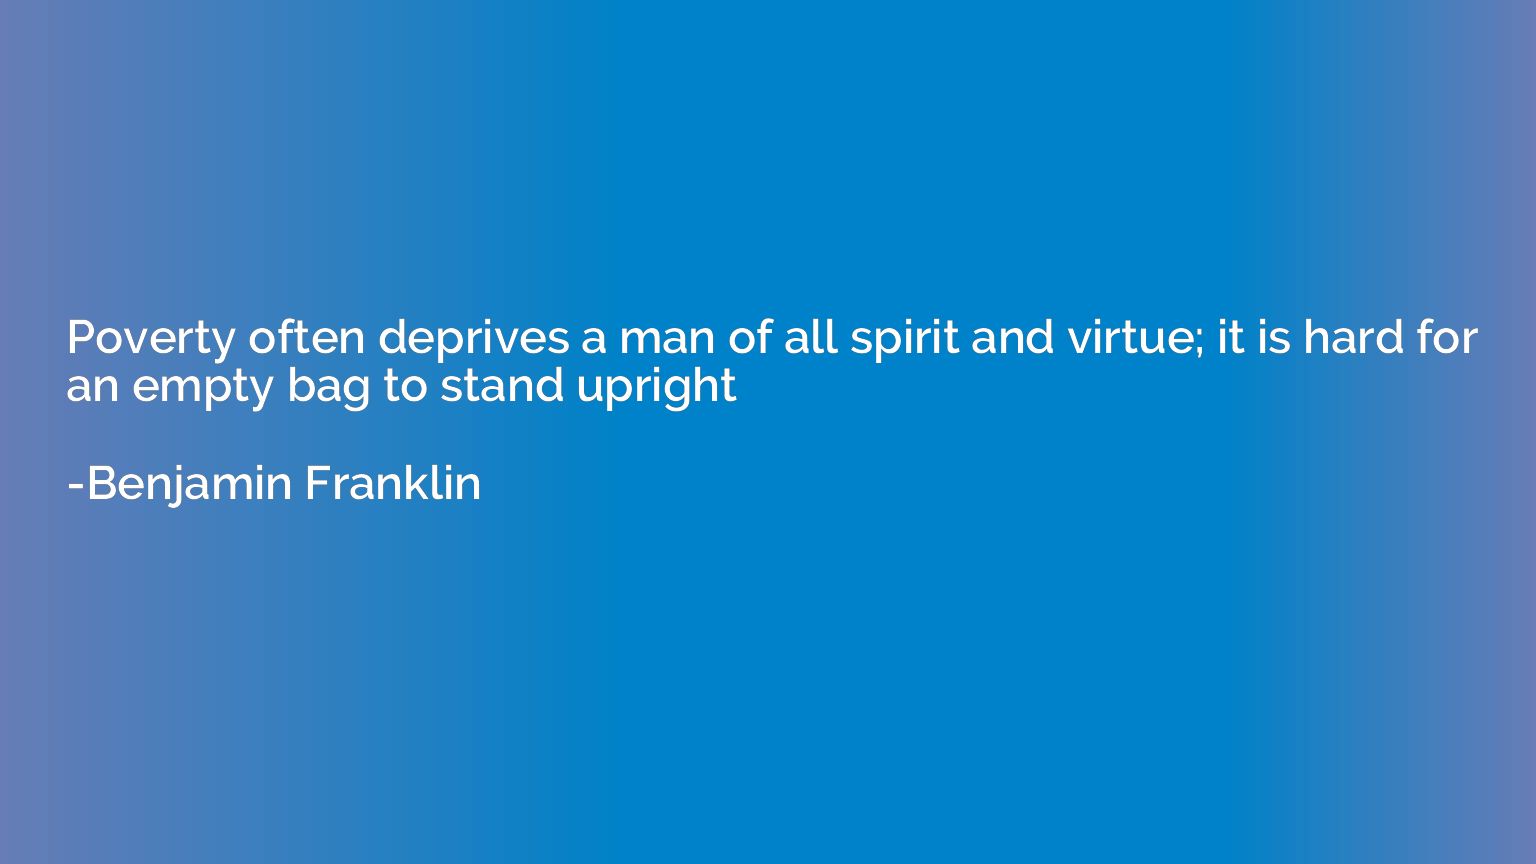 Poverty often deprives a man of all spirit and virtue; it is